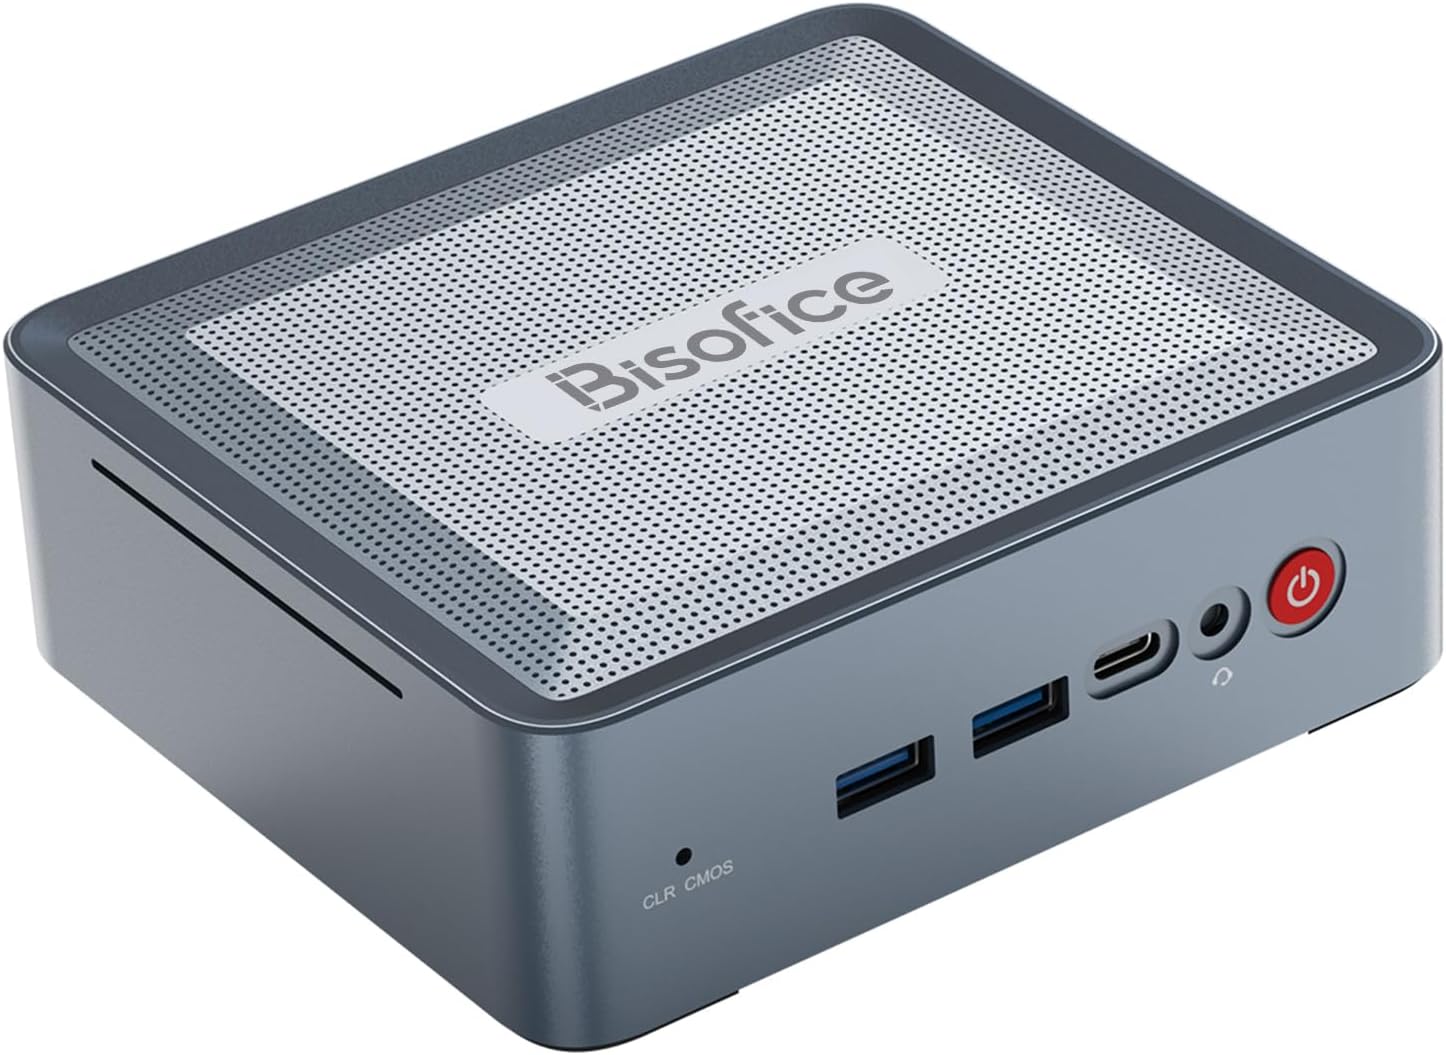 BUZHI Pocket PC,U58 Mini PC Desktop Computer with AMD Ryzen™ 7 5800U Processors 16G DDR4 Dual Channel 512G SSD Storage 8 Cores 16 Lines Threads Up to 4.4 GHz Support Triple Screen 4K Resolution